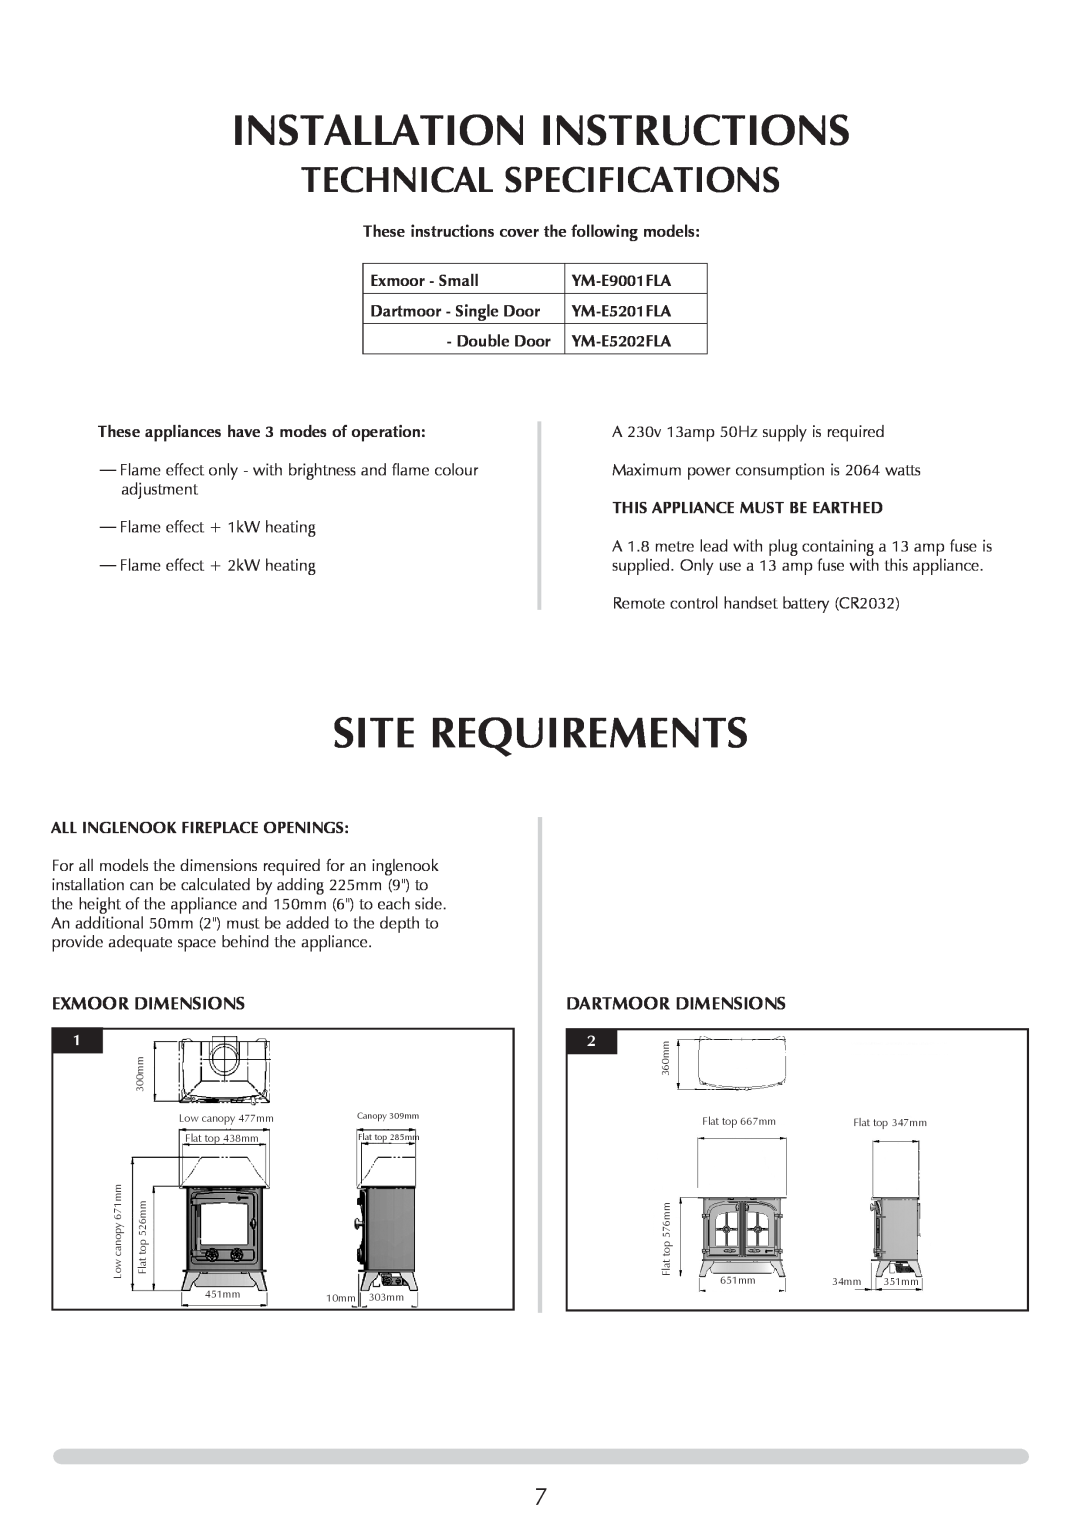 Yeoman YM-E9001FLA manual Installation Instructions, Site Requirements, Technical Specifications, Exmoor Dimensions 